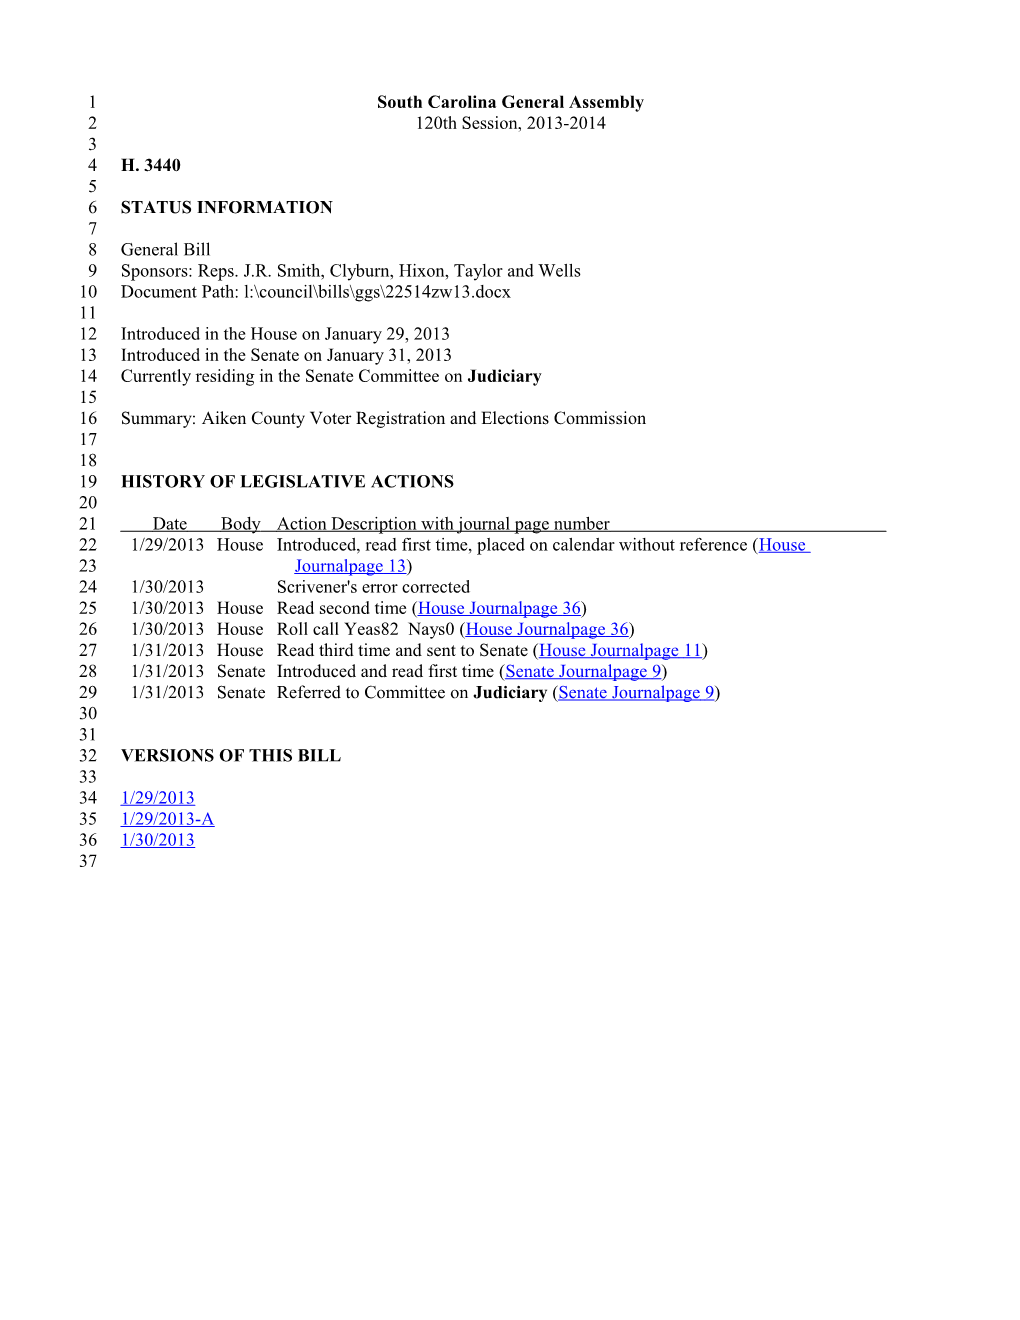 2013-2014 Bill 3440: Aiken County Voter Registration and Elections Commission - South Carolina